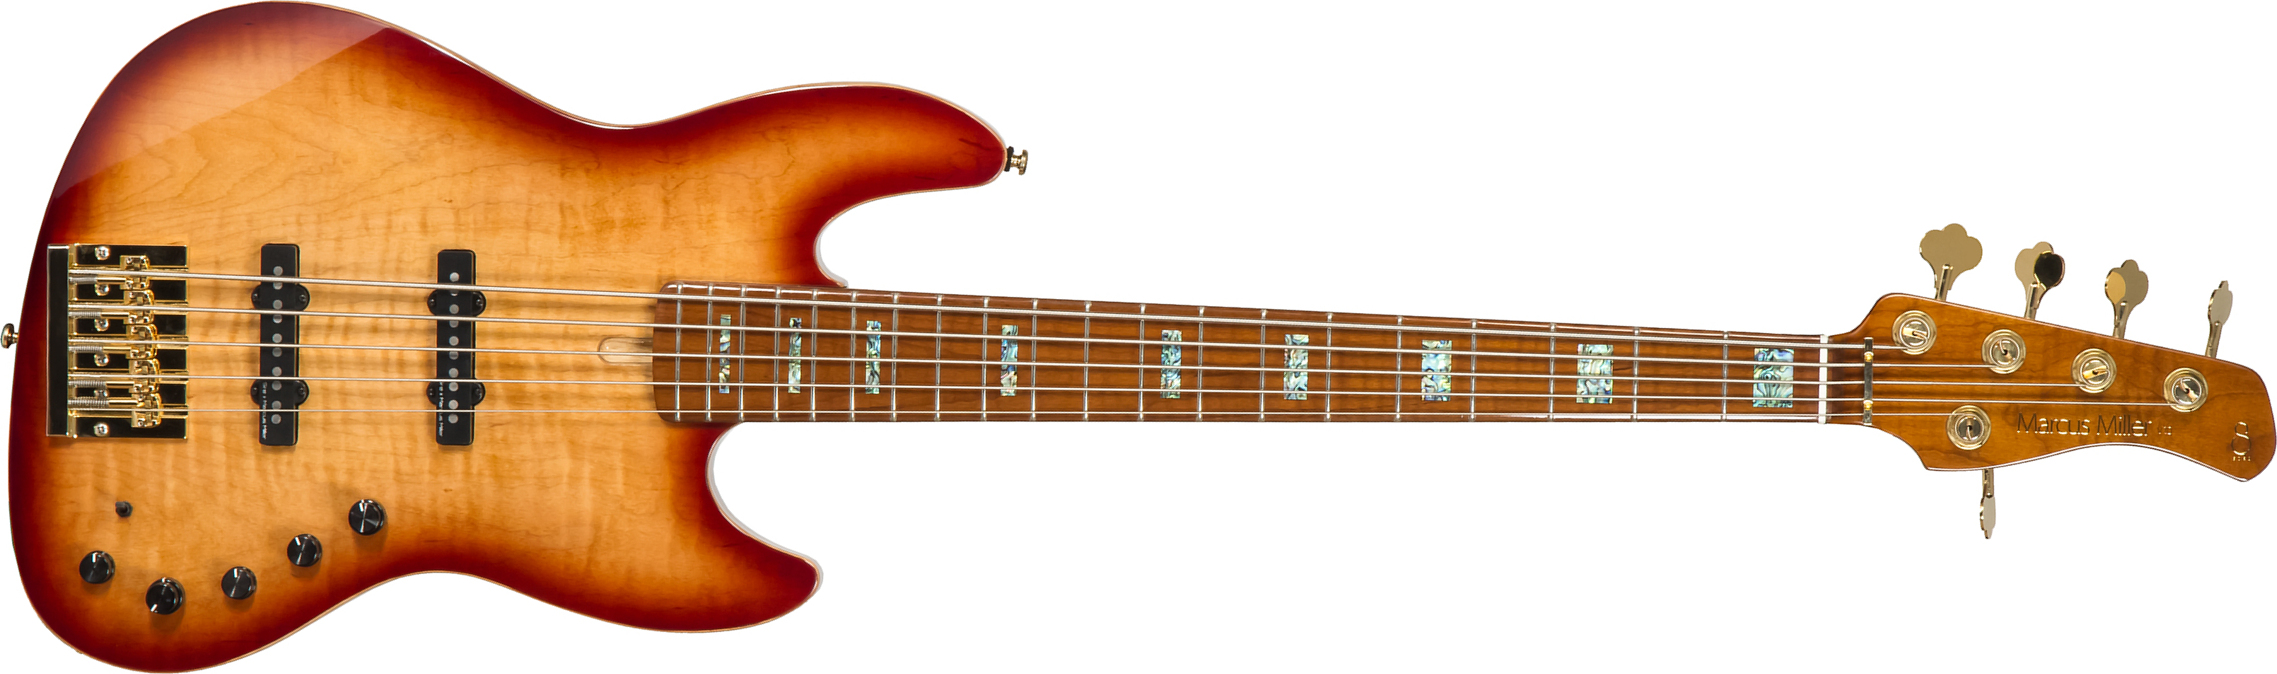 Marcus Miller V10dx 5st 5c Active Mn - Tobacco Sunburst - Solid body electric bass - Main picture